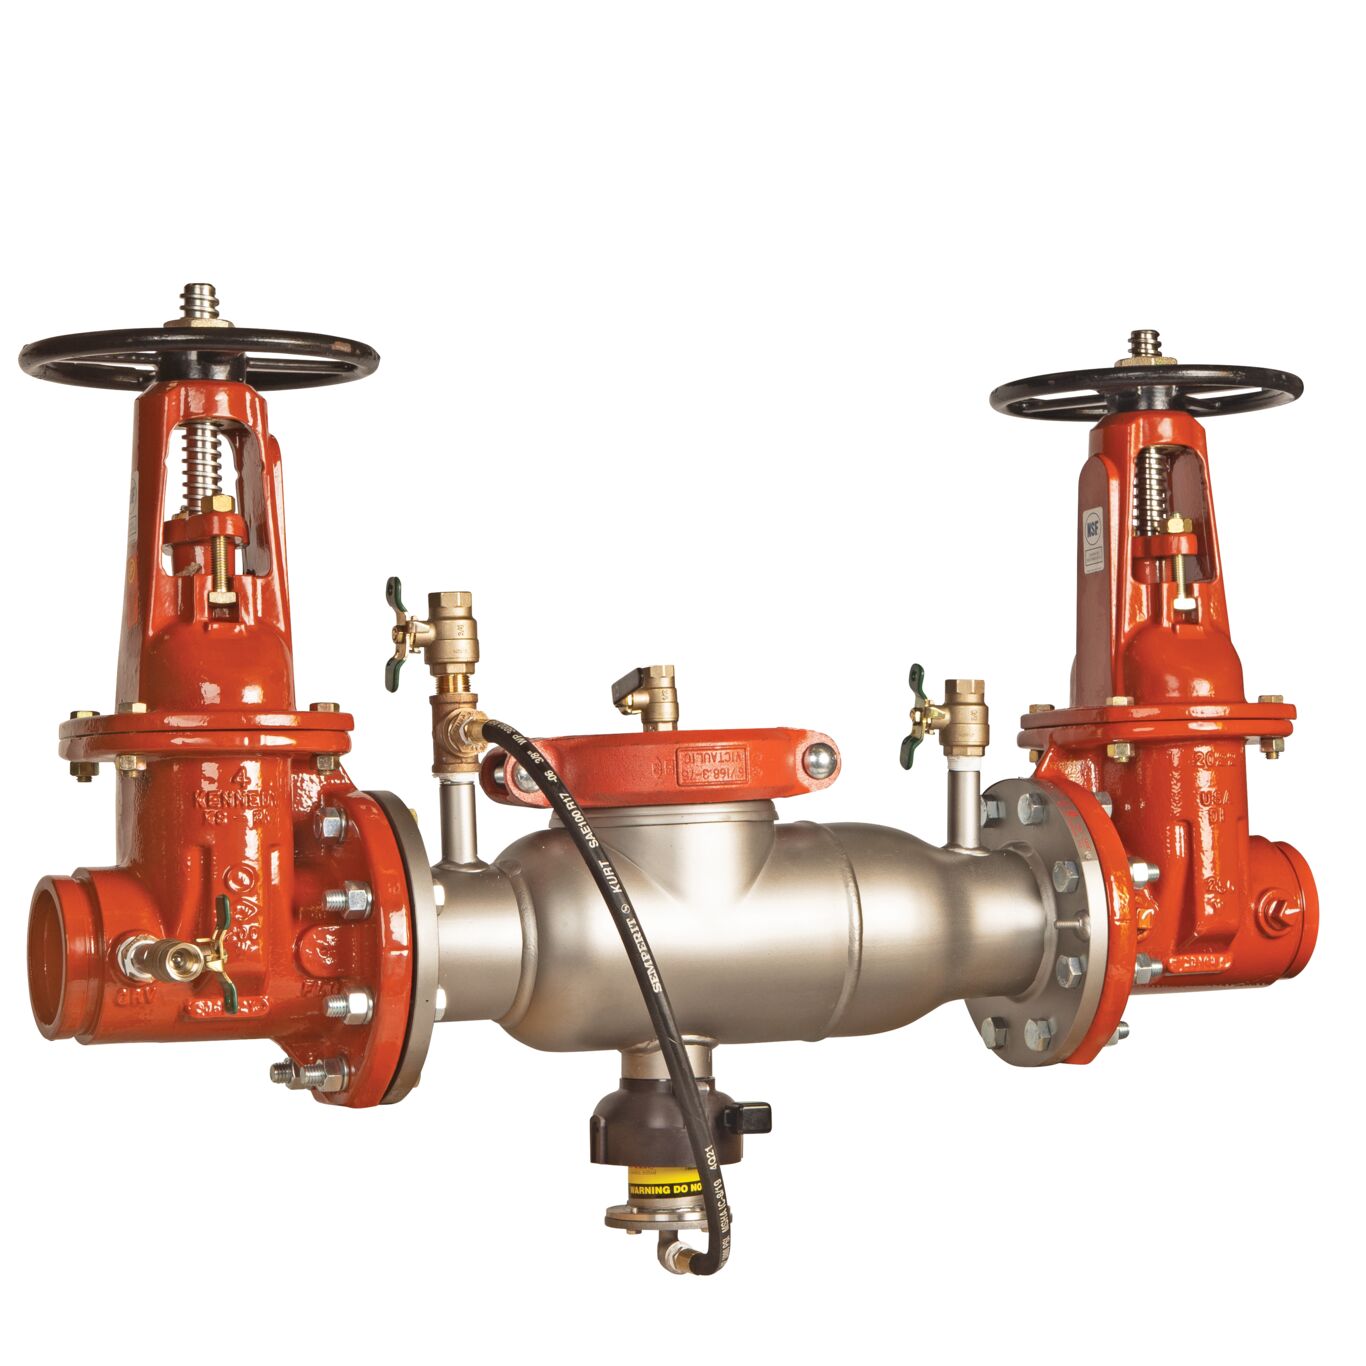 Reduced Pressure Zone Assembly Backflow Preventer, Stainless Steel, OSY Gates, Groove x Groove and Flood Sensor